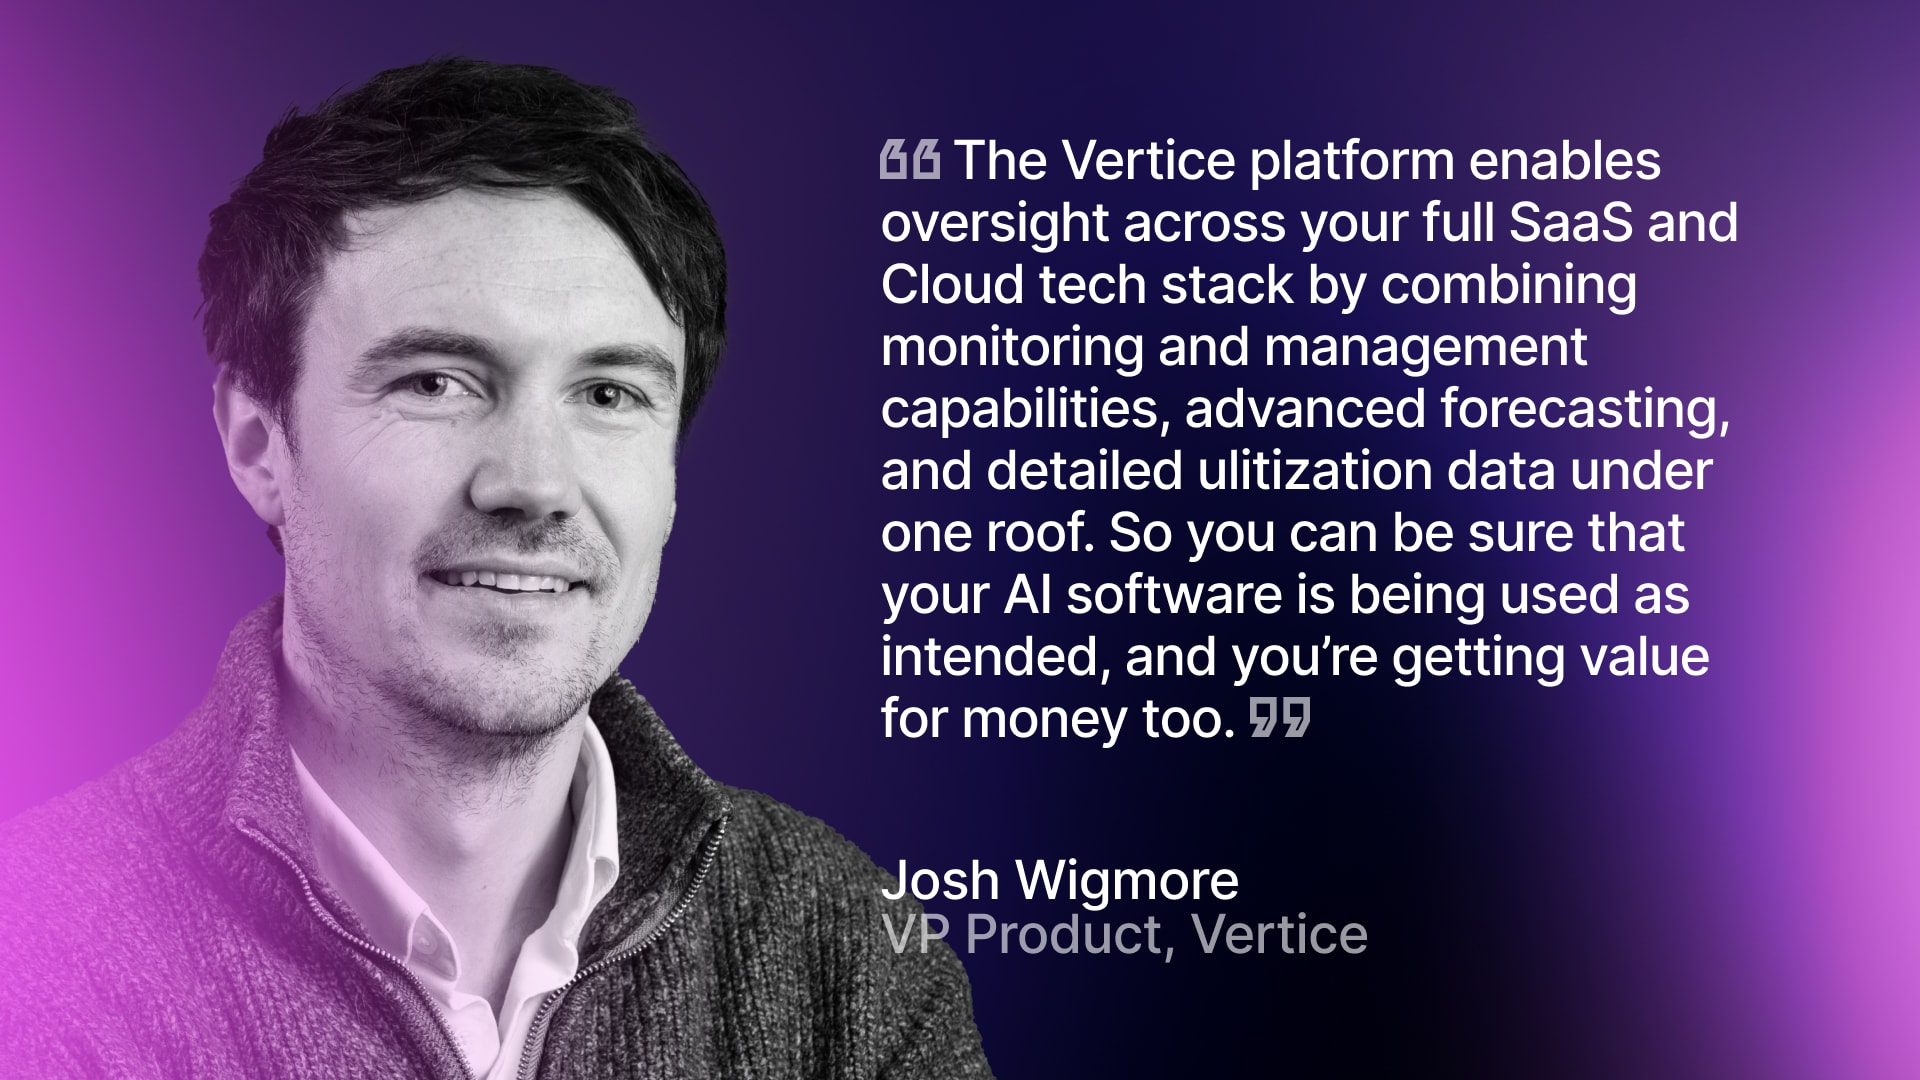 Josh Wigmore, VP of Product at Vertice, explains how the Vertice platform enables full oversight over your software spend and utilization.